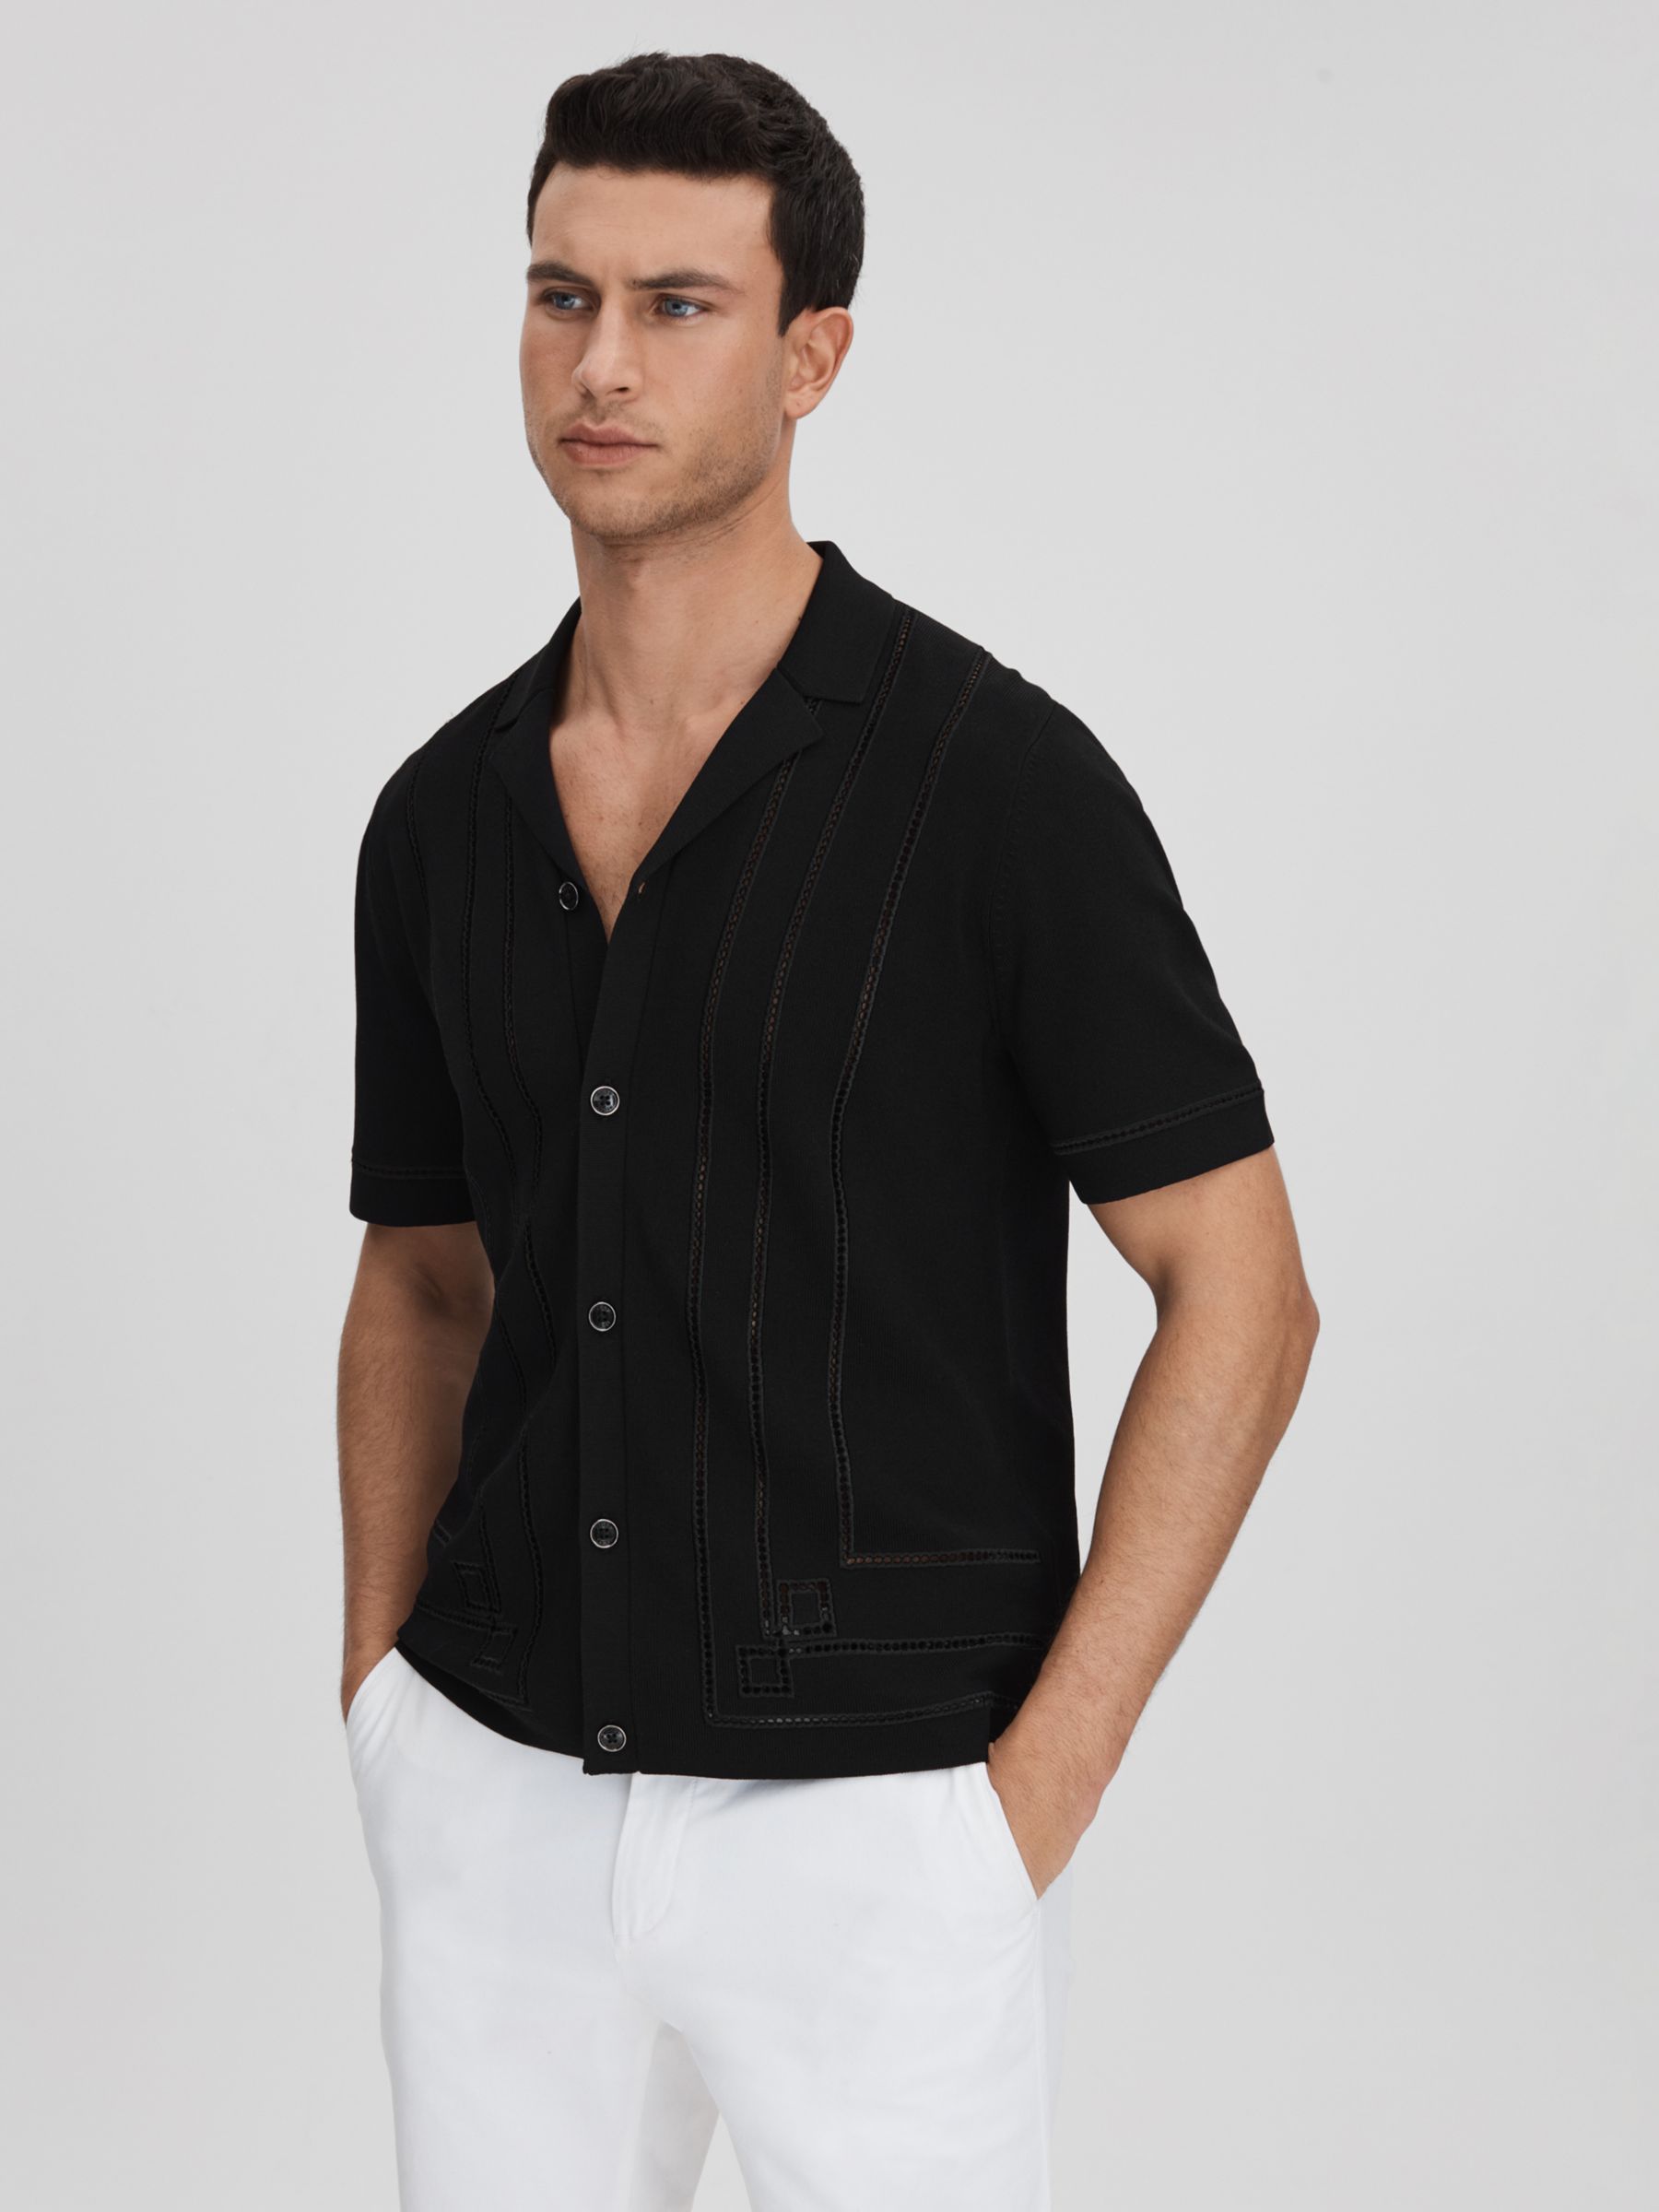 Reiss Heartwood Short Sleeve Embroidered Shirt, Black, XS